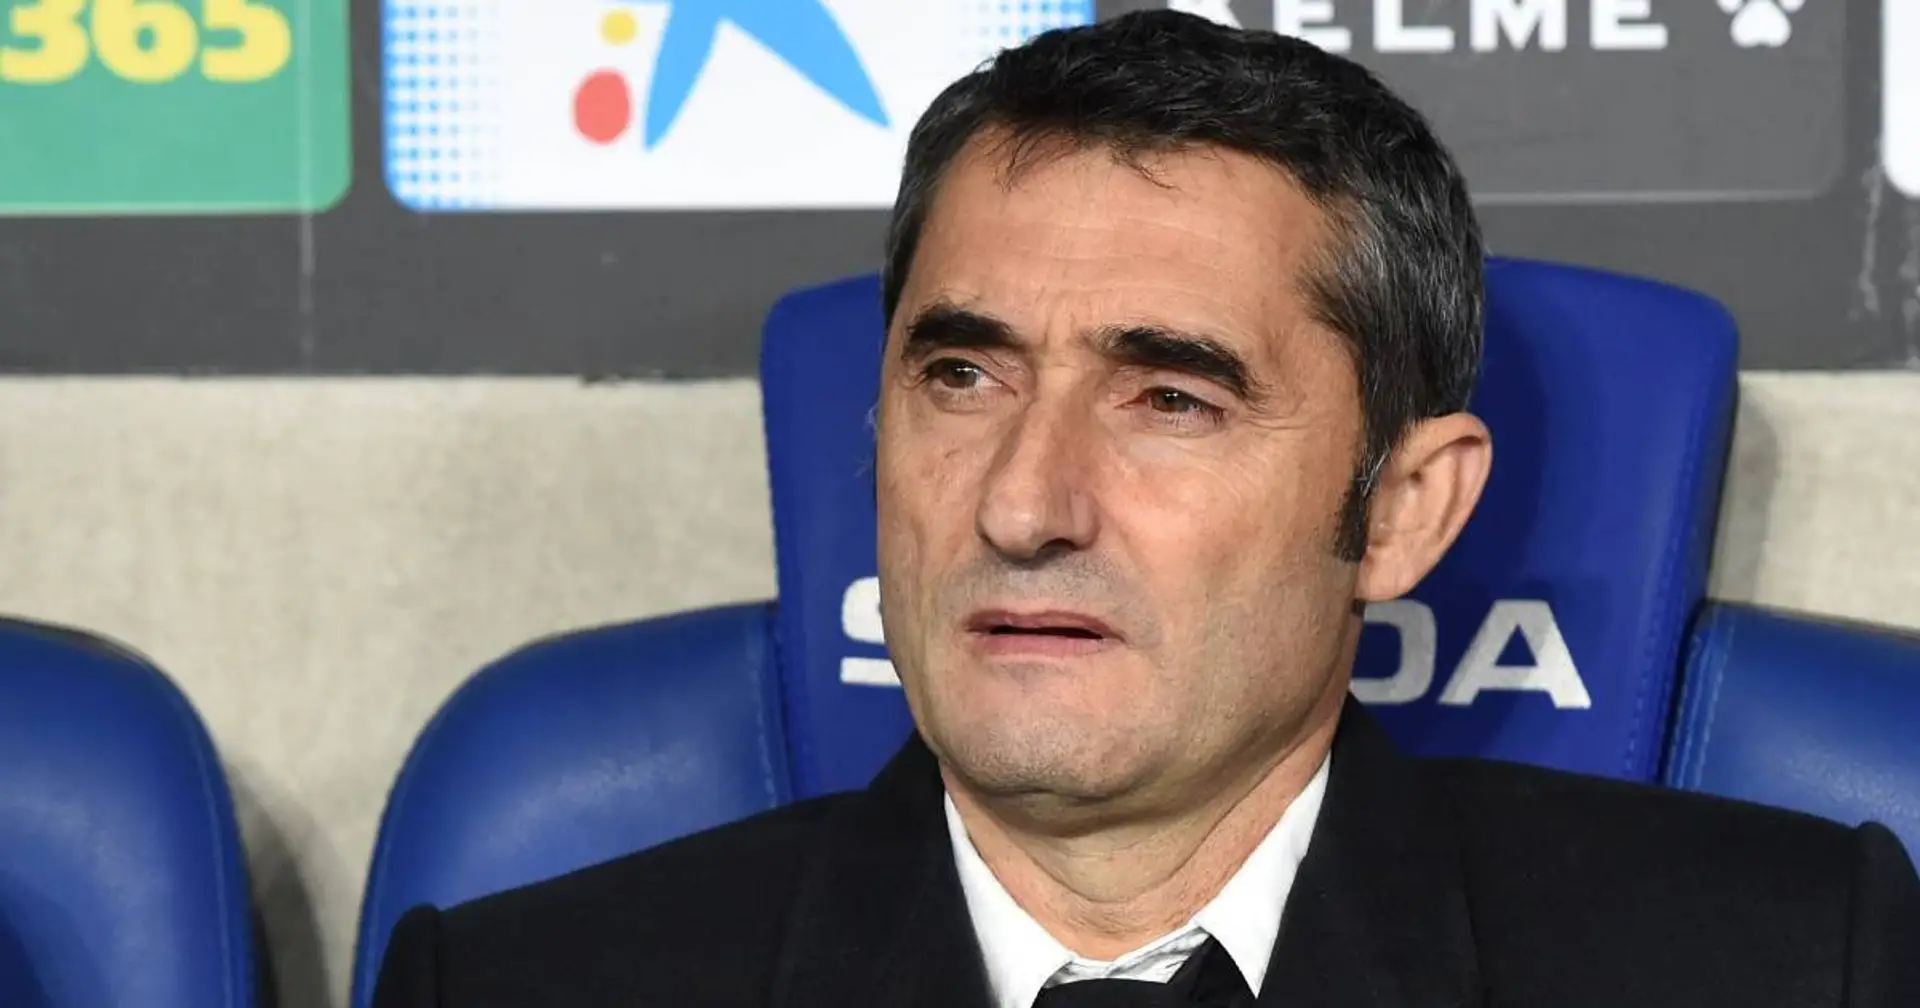 Ernesto Valverde set to return to coaching but it depends on one thing